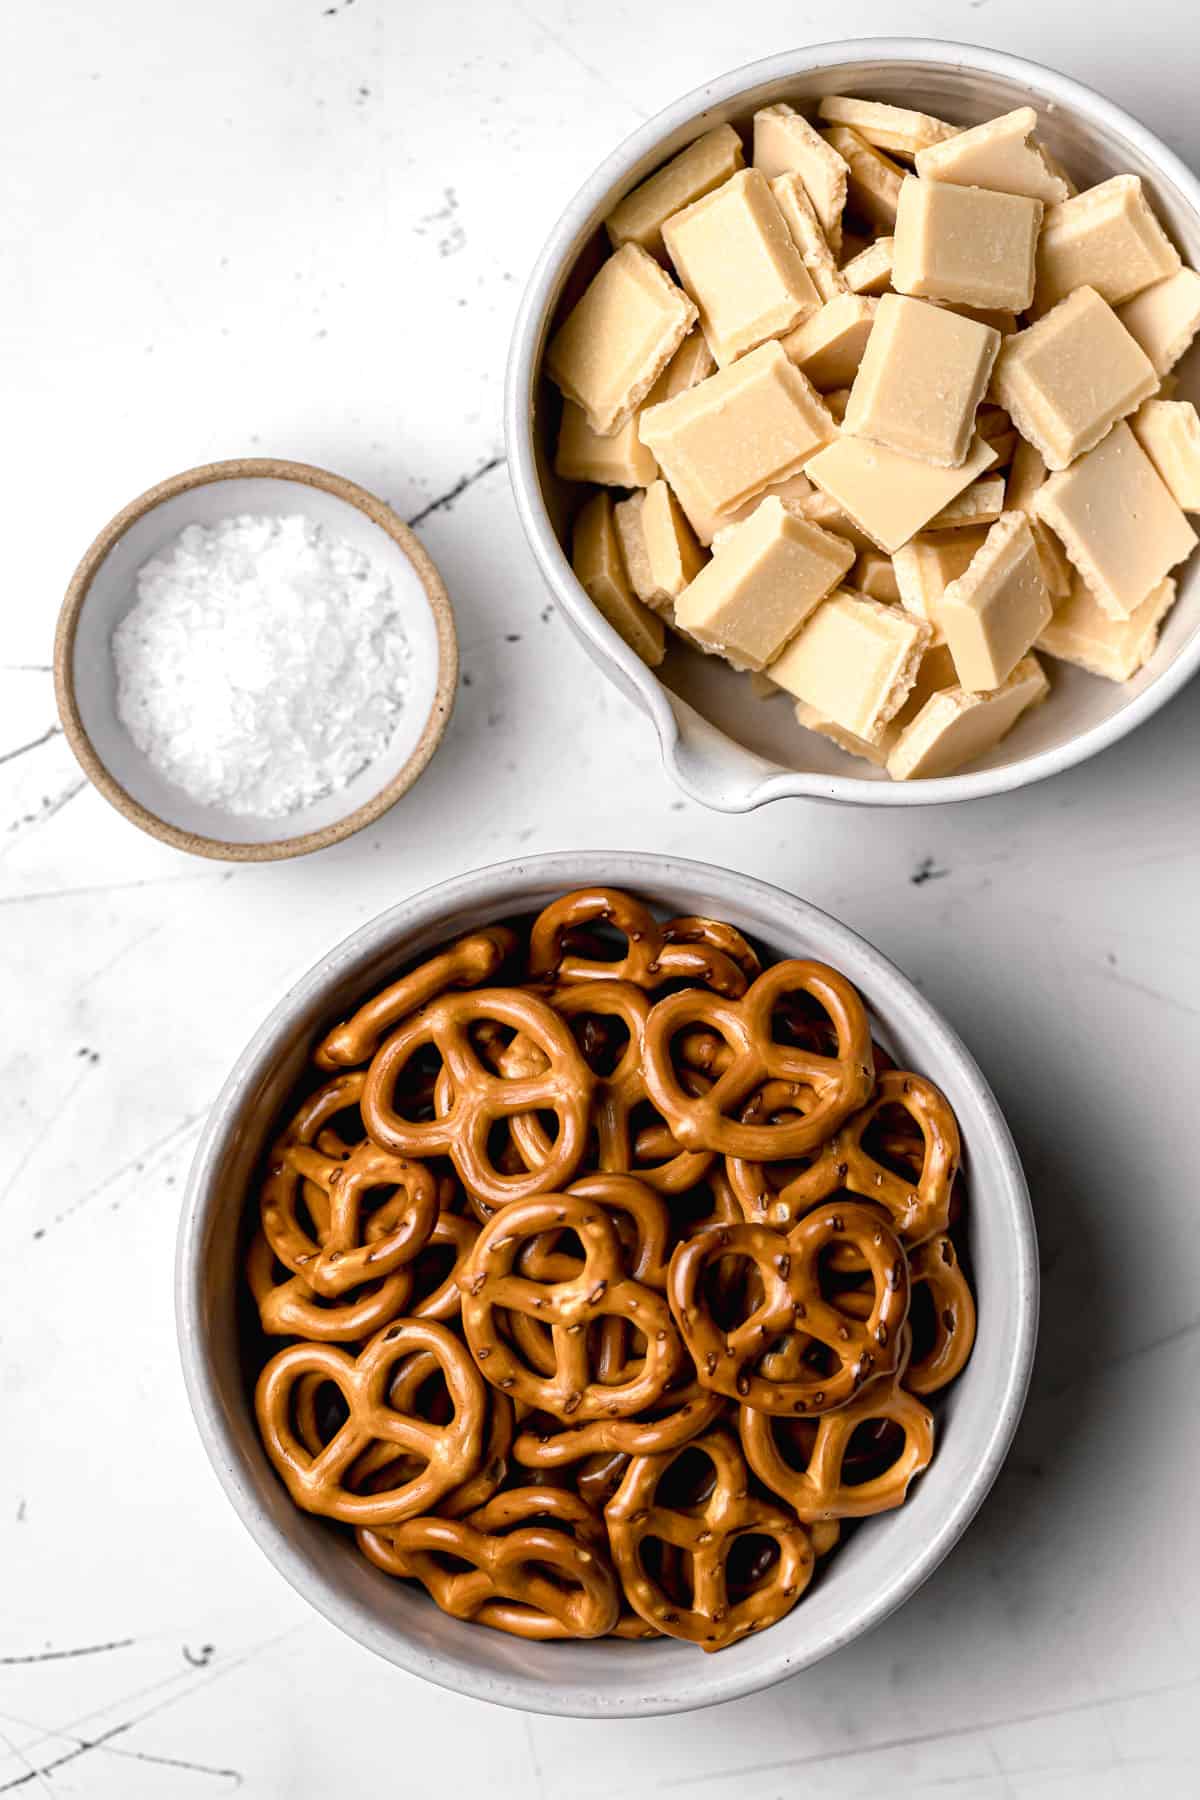 ingredients for white chocolate covered pretzels.